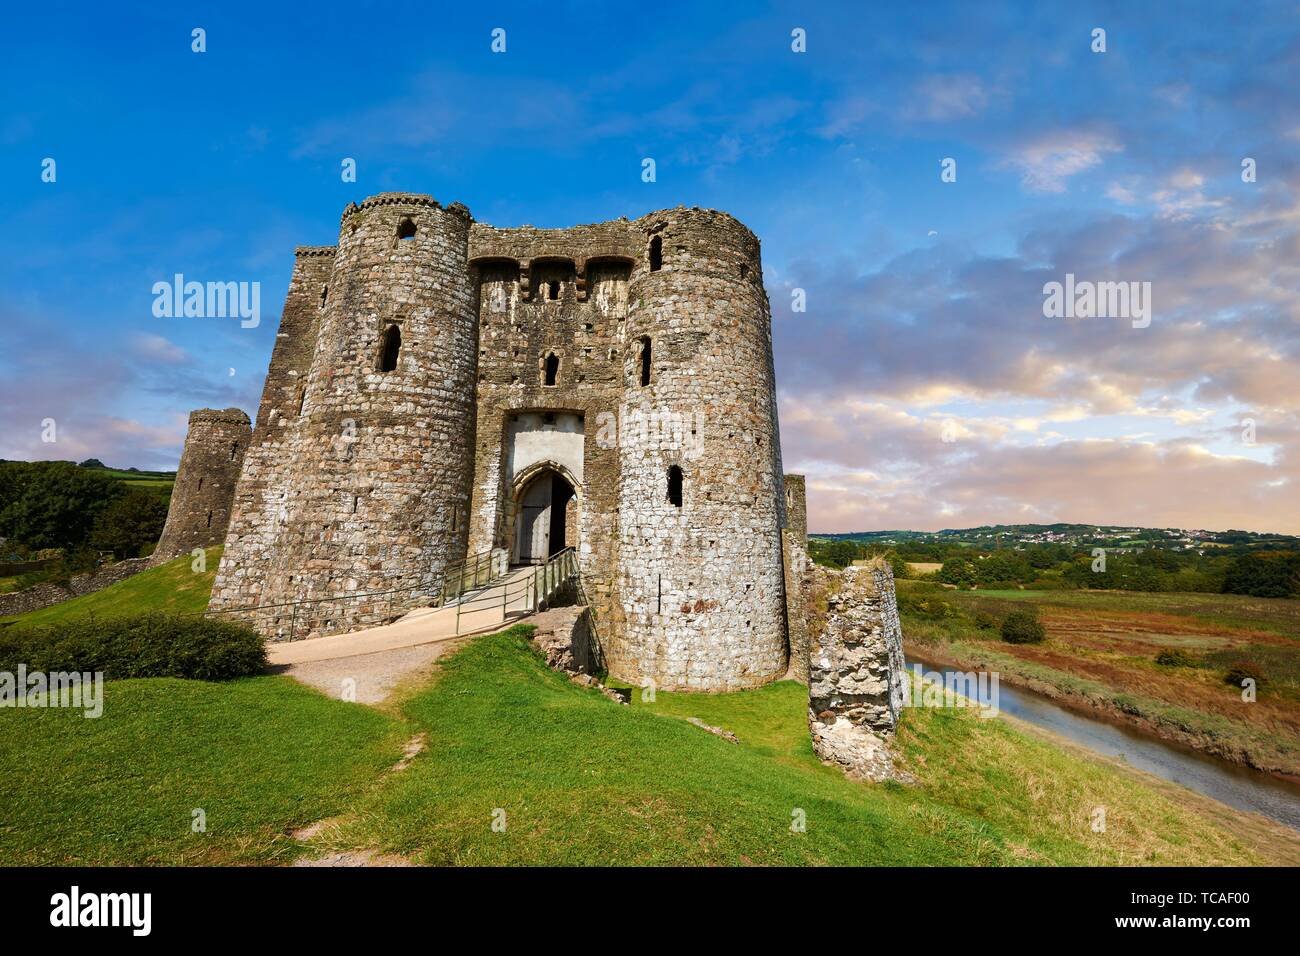 Gate towers of the Medieval Norman Kidwelly Castle, Kidwelly, Carmarthenshire, Wales. Stock Photo